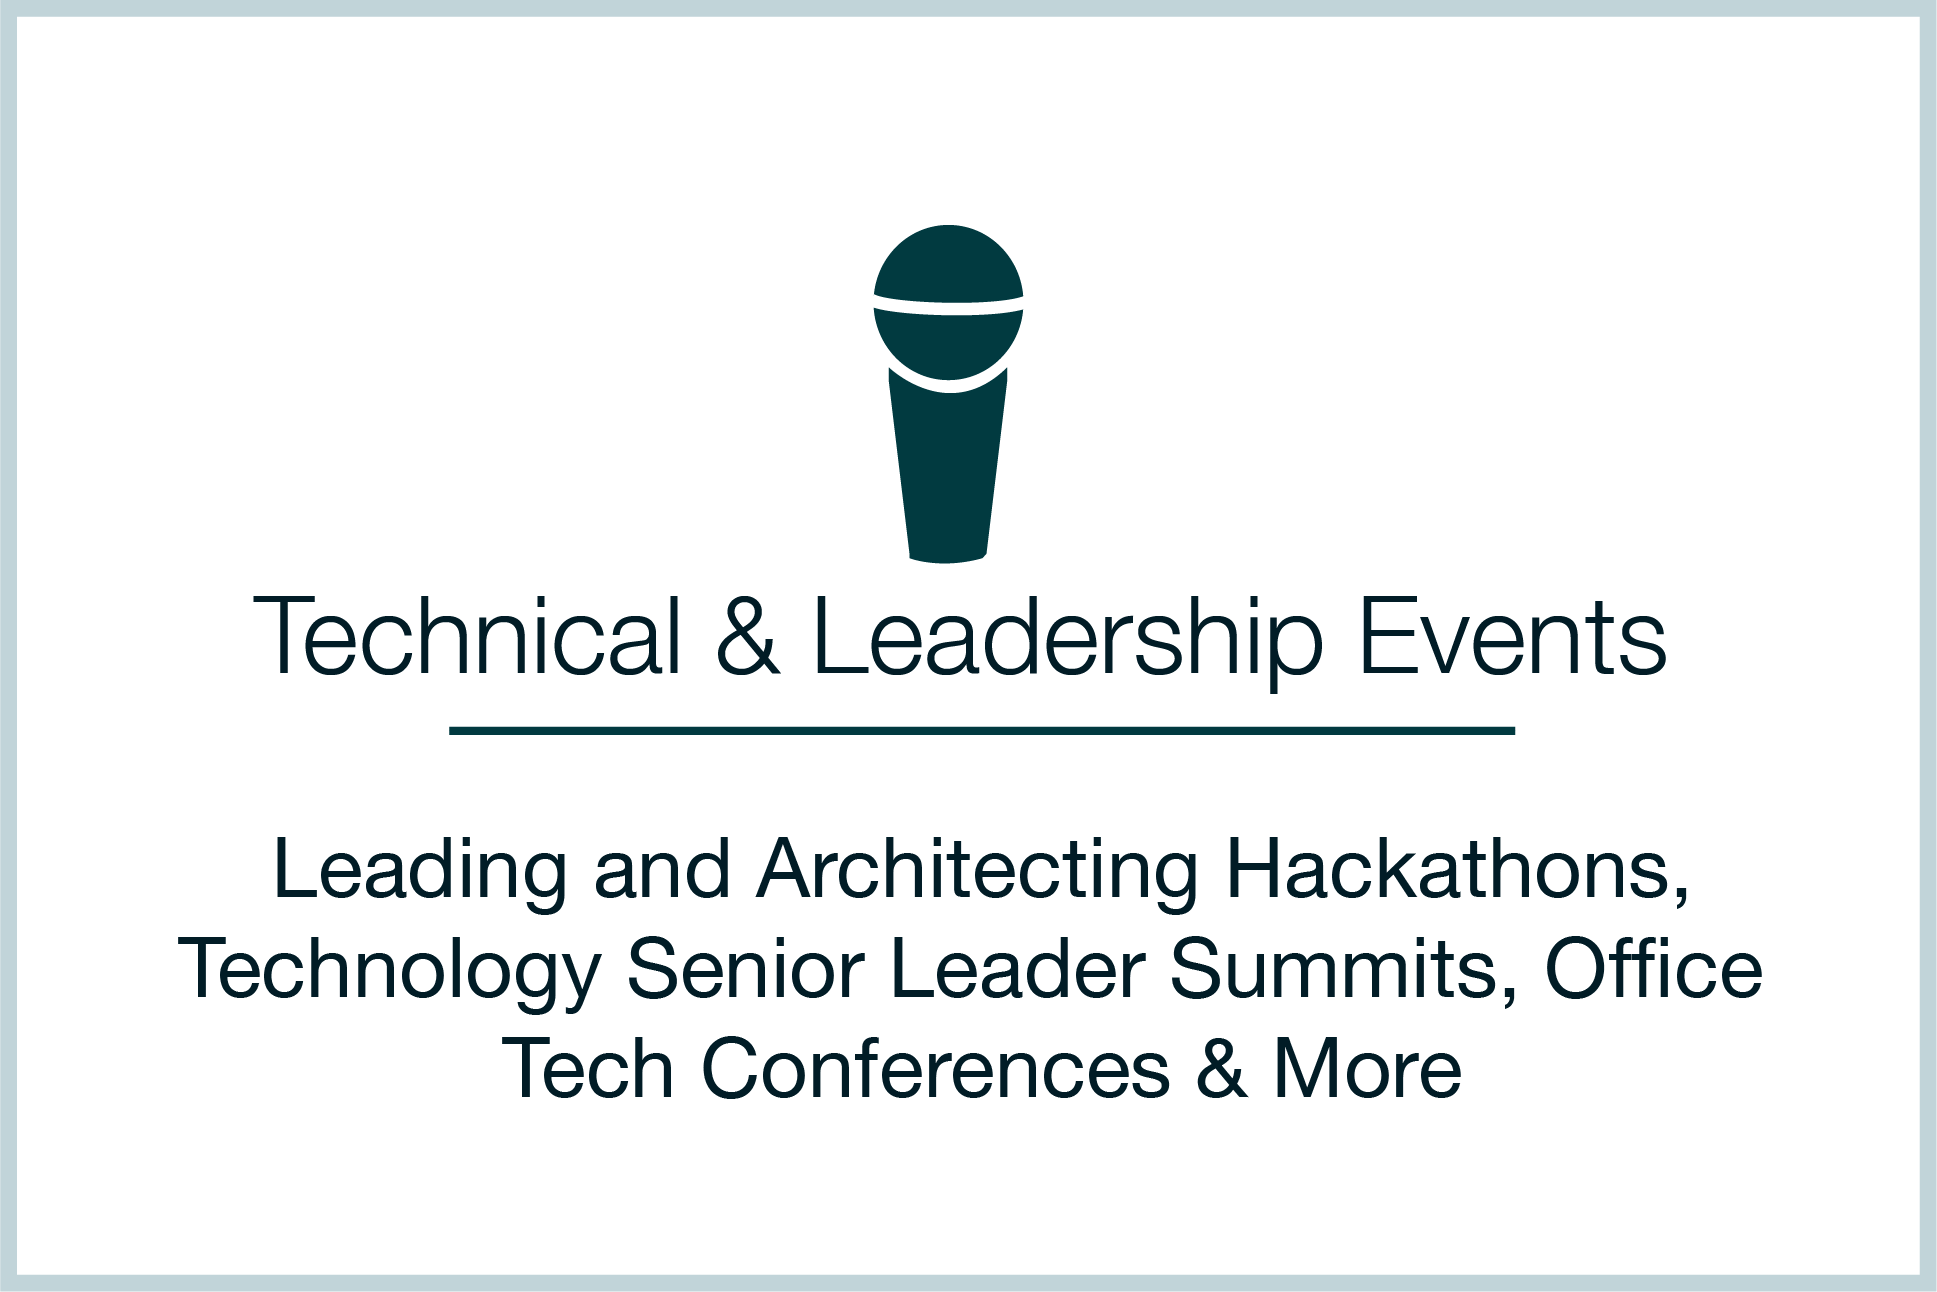 Leading and architecting hackathons, Technology senior leader summits, office tech conferences, and more.